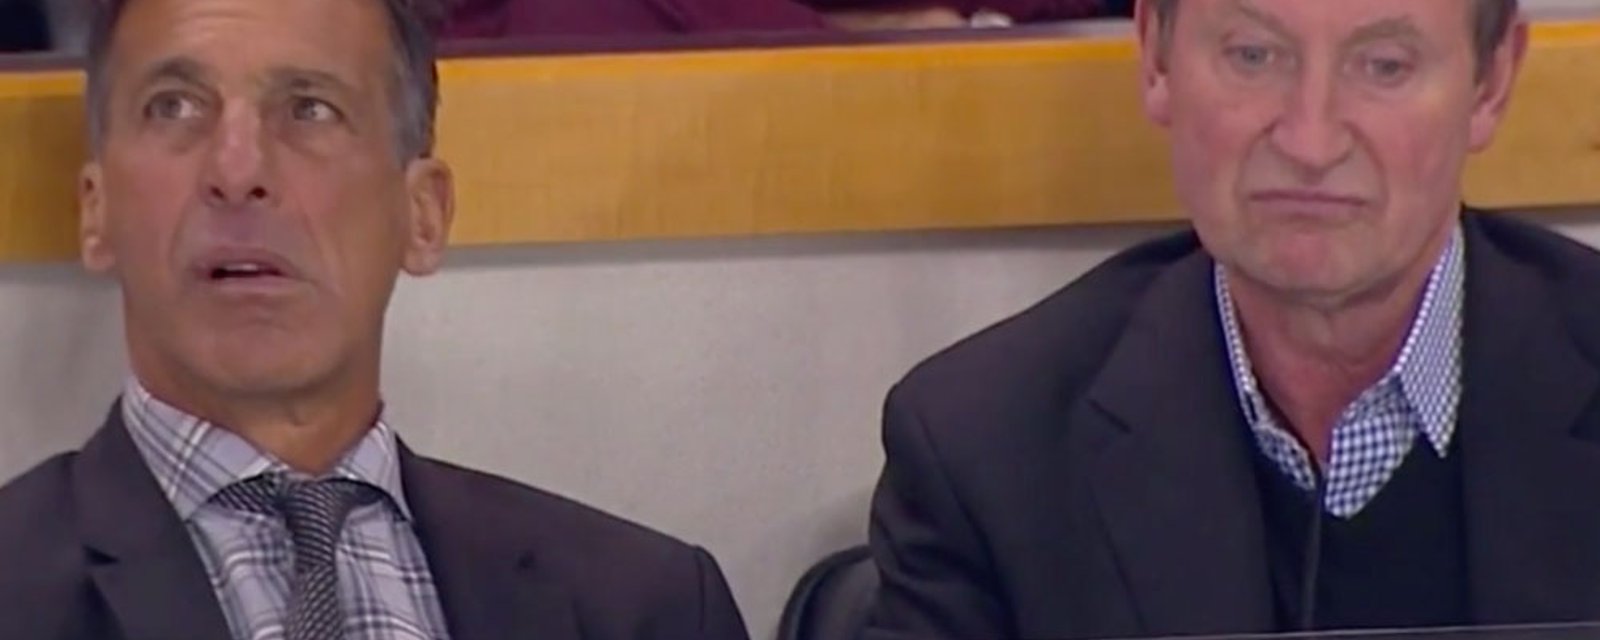 Gretzky and Chelios caught having a weird conservation during Oilers-Hawks game 